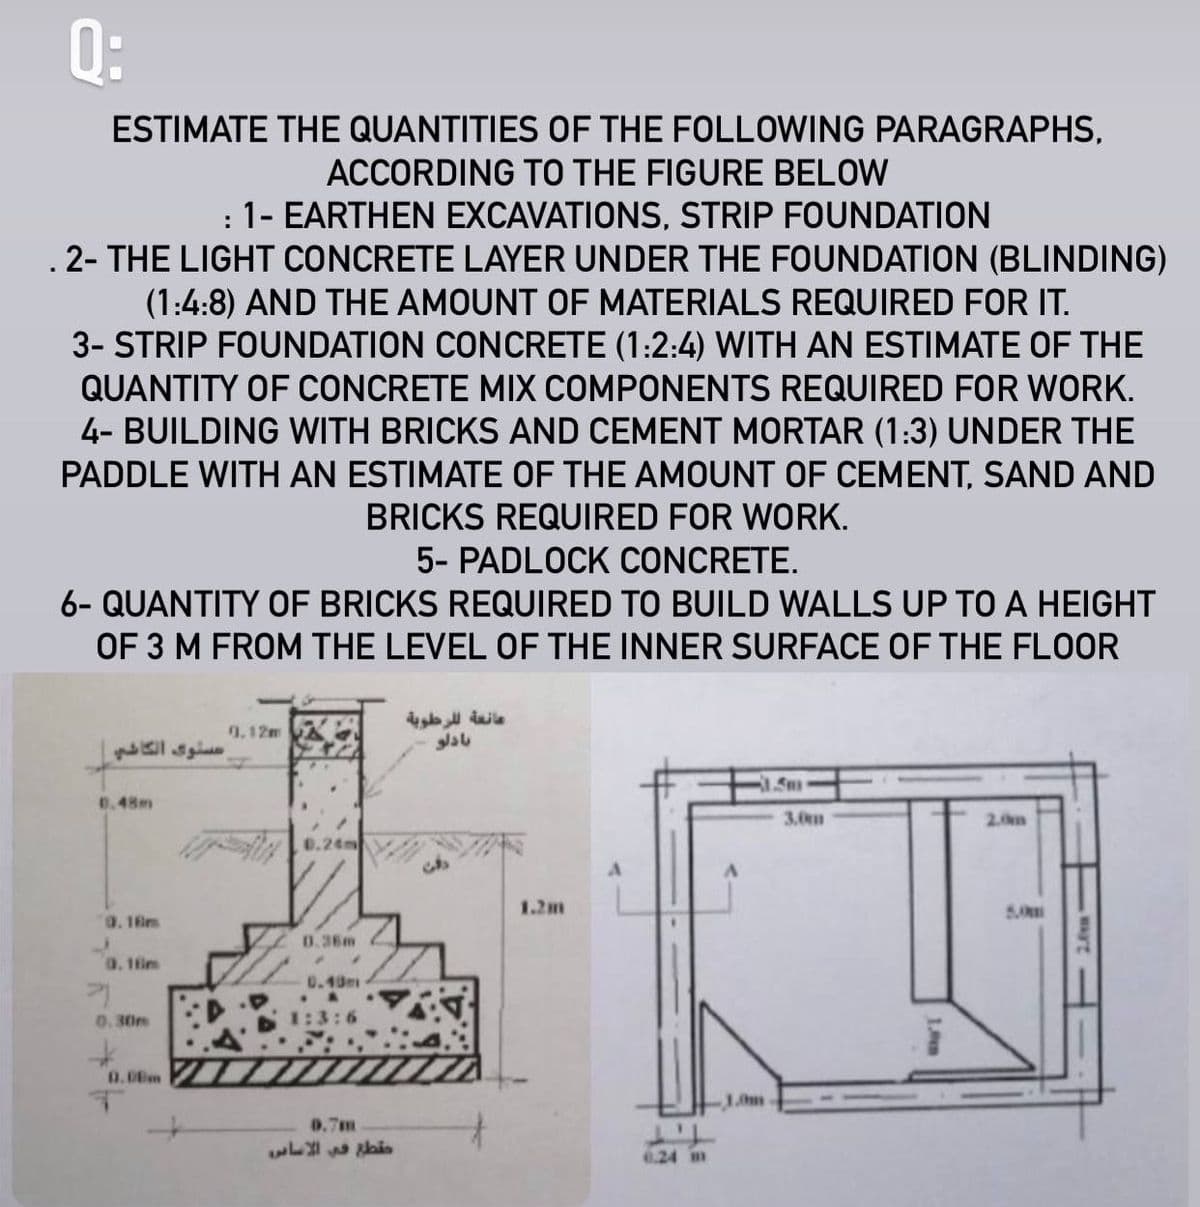 Q:
ESTIMATE THE QUANTITIES OF THE FOLLOWING PARAGRAPHS,
ACCORDING TO THE FIGURE BELOW
1- EARTHEN EXCAVATIONS, STRIP FOUNDATION
. 2- THE LIGHT CONCRETE LAYER UNDER THE FOUNDATION (BLINDING)
(1:4:8) AND THE AMOUNT OF MATERIALS REQUIRED FOR IT.
3- STRIP FOUNDATION CONCRETE (1:2:4) WITH AN ESTIMATE OF THE
%3D
QUANTITY OF CONCRETE MIX COMPONENTS REQUIRED FOR WORK.
4- BUILDING WITH BRICKS AND CEMENT MORTAR (1:3) UNDER THE
PADDLE WITH AN ESTIMATE OF THE AMOUNT OF CEMENT, SAND AND
BRICKS REQUIRED FOR WORK.
5- PADLOCK CONCRETE.
6- QUANTITY OF BRICKS REQUIRED TO BUILD WALLS UP TO A HEIGHT
OF 3 M FROM THE LEVEL OF THE INNER SURFACE OF THE FLOOR
9.12m
عسنوى الكاشي
0.48m
3.0m
2.0m
0.24m
1.2m
0. 18m
0.36m
0. 16m
0.40m
0.30m
1:3:6
0.00m
10m
0.7m
1.24 m
1,0cm
